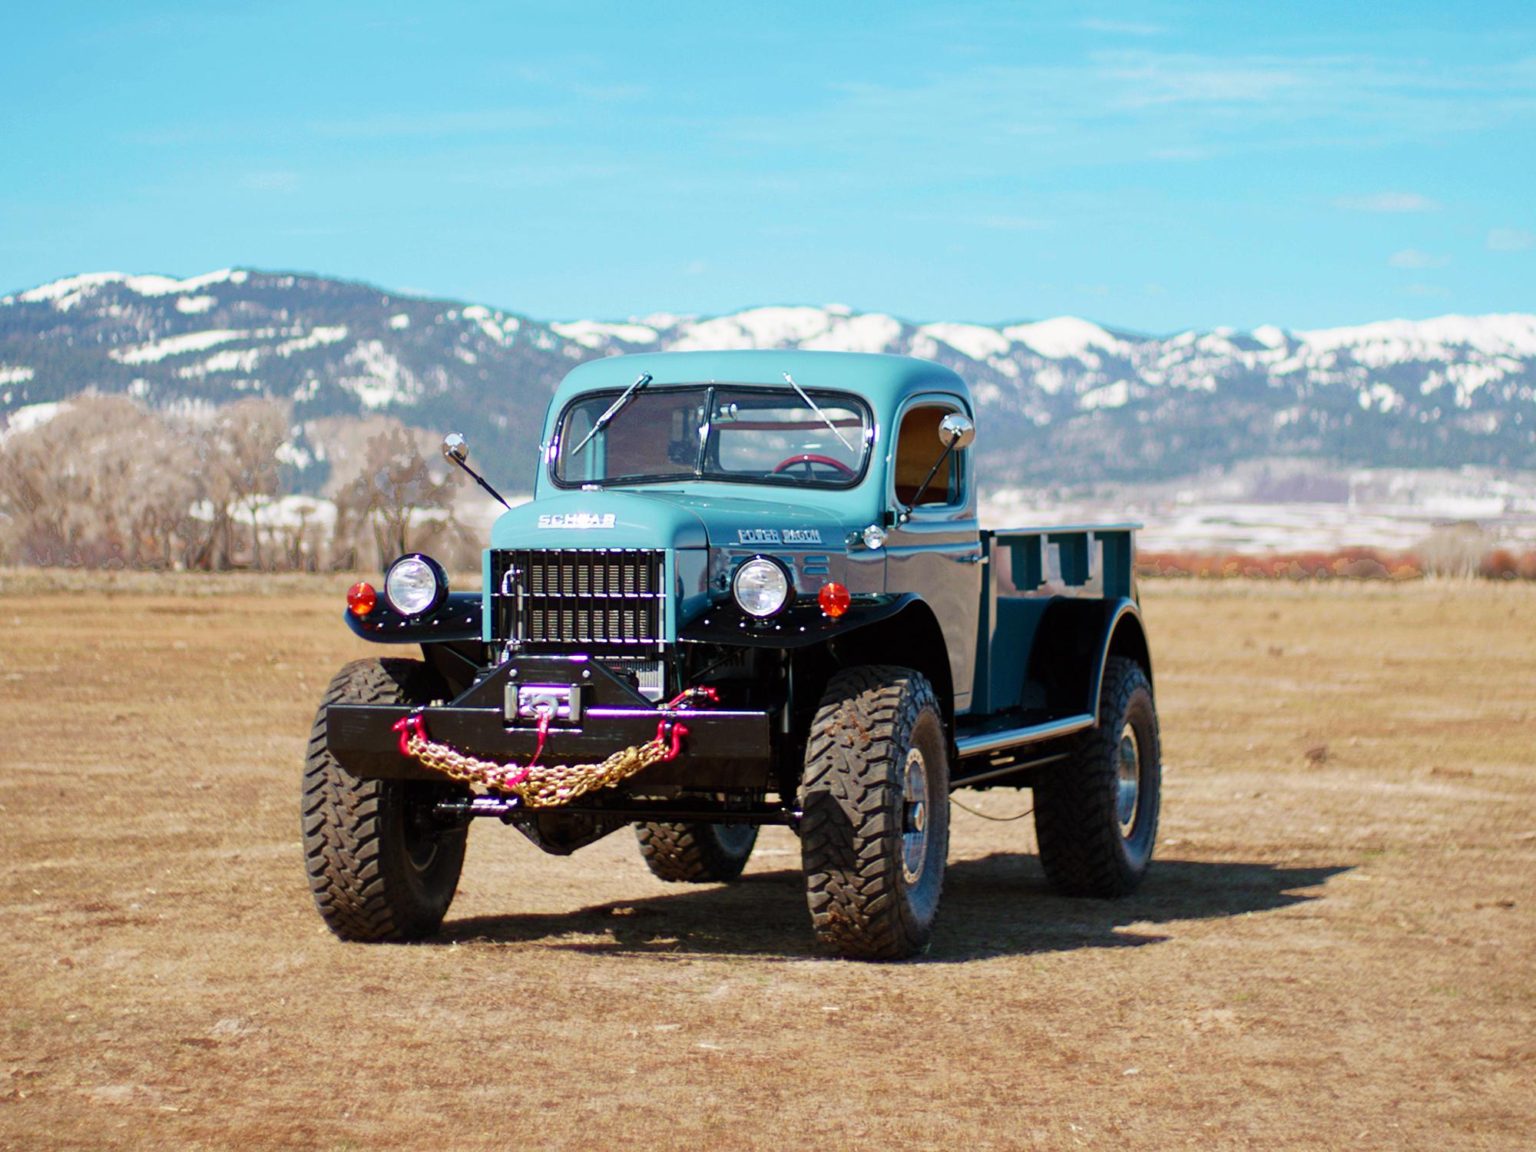 The winner of the Charles Schwab Challenge earns this resto-modded Dodge Power Wagon.